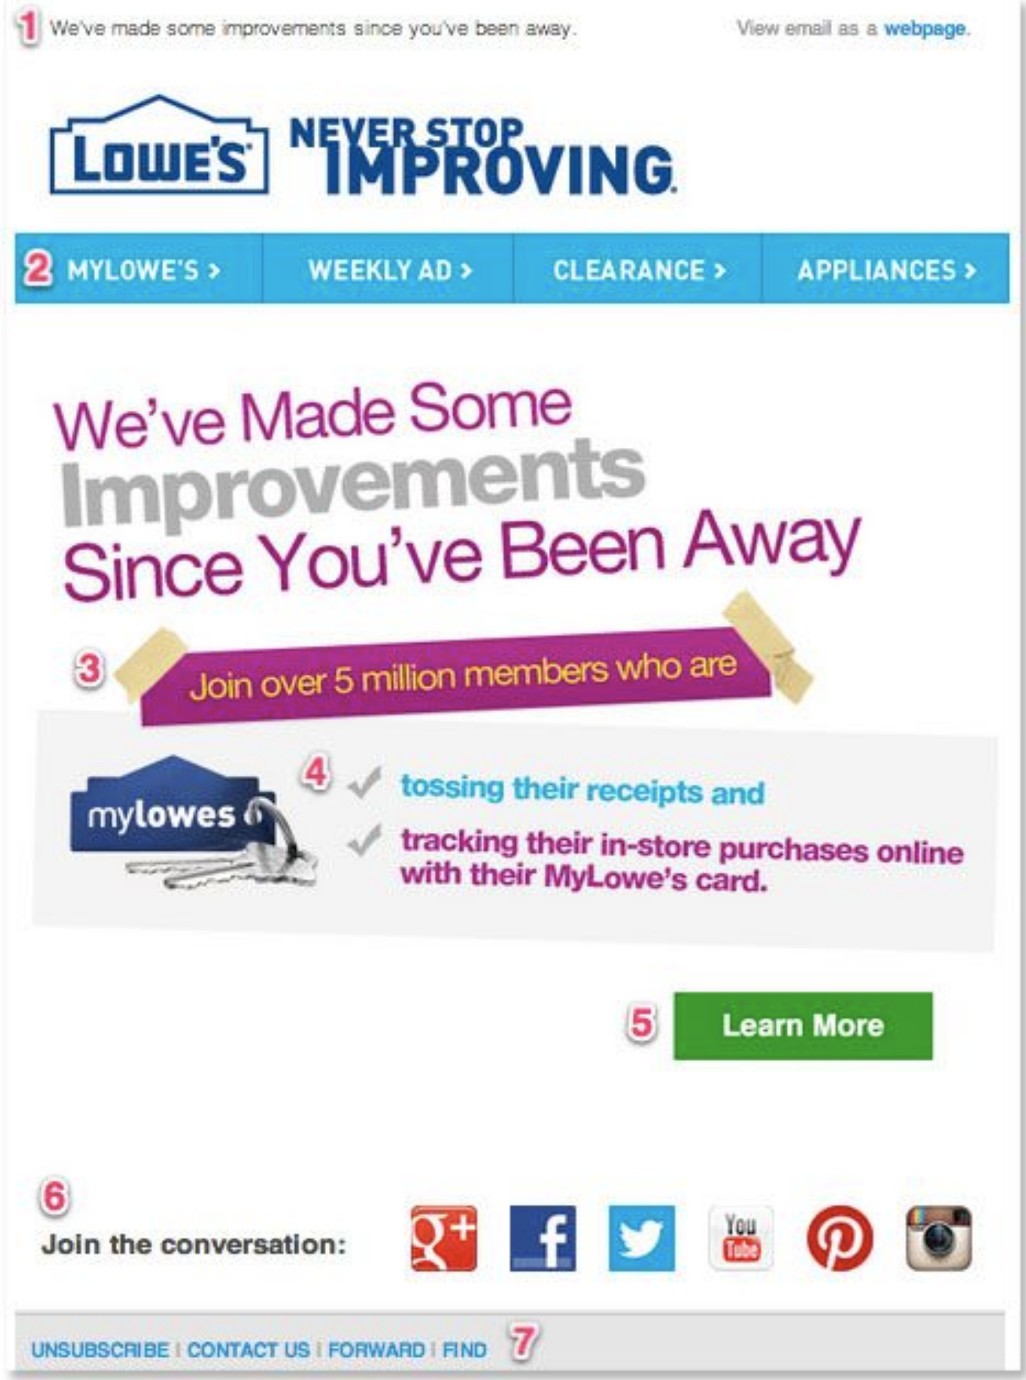 Example of reactivation email from Lowe's